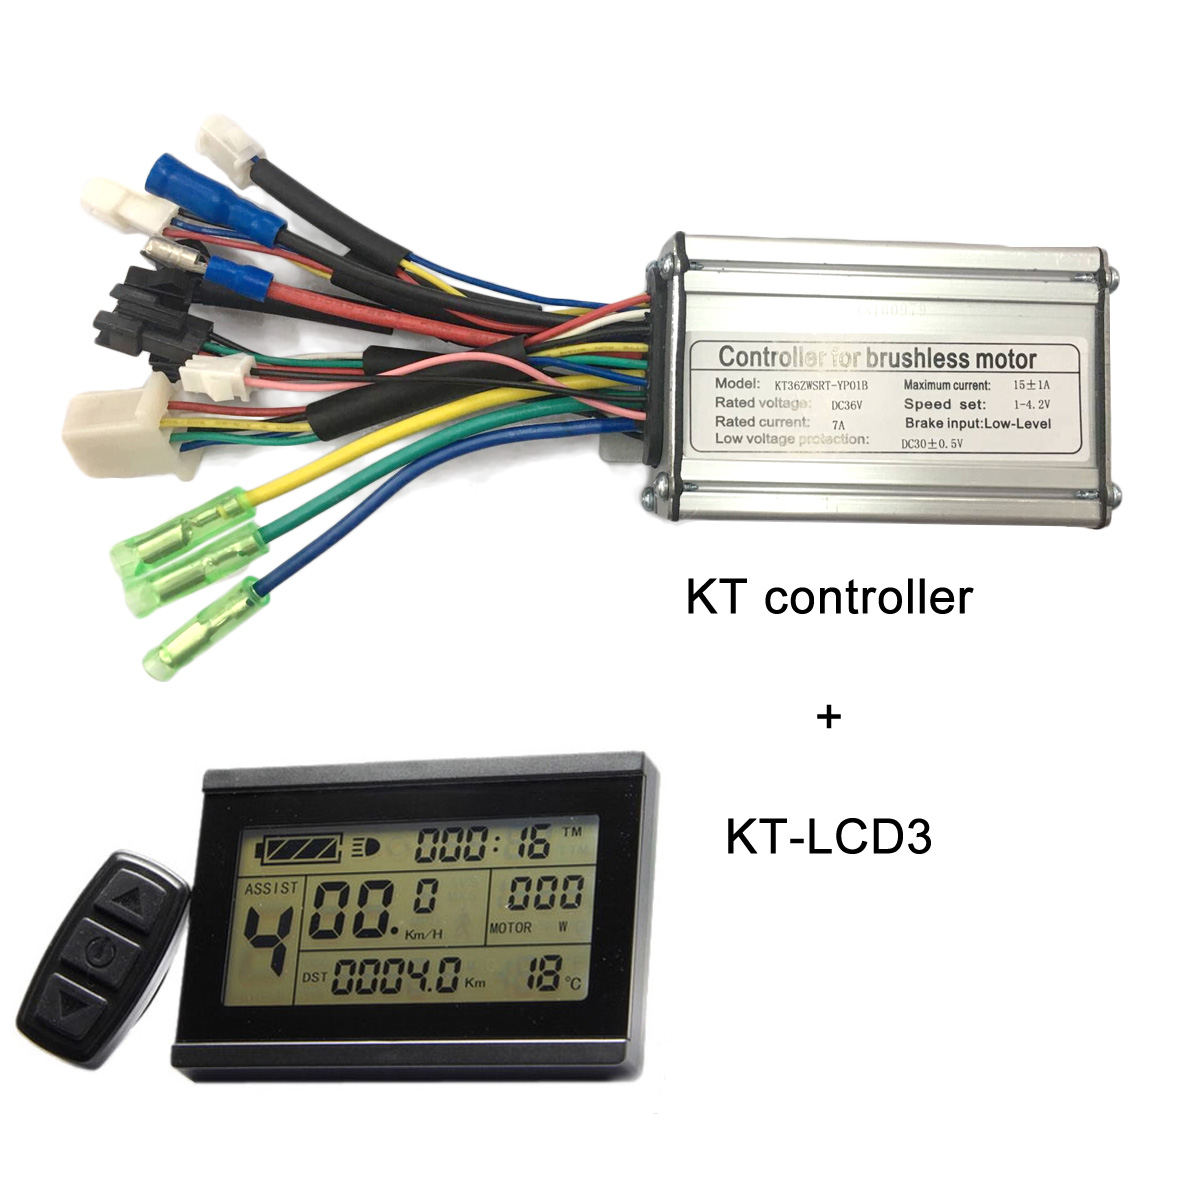 KT controllers wit KT-LCD3 electric bike display